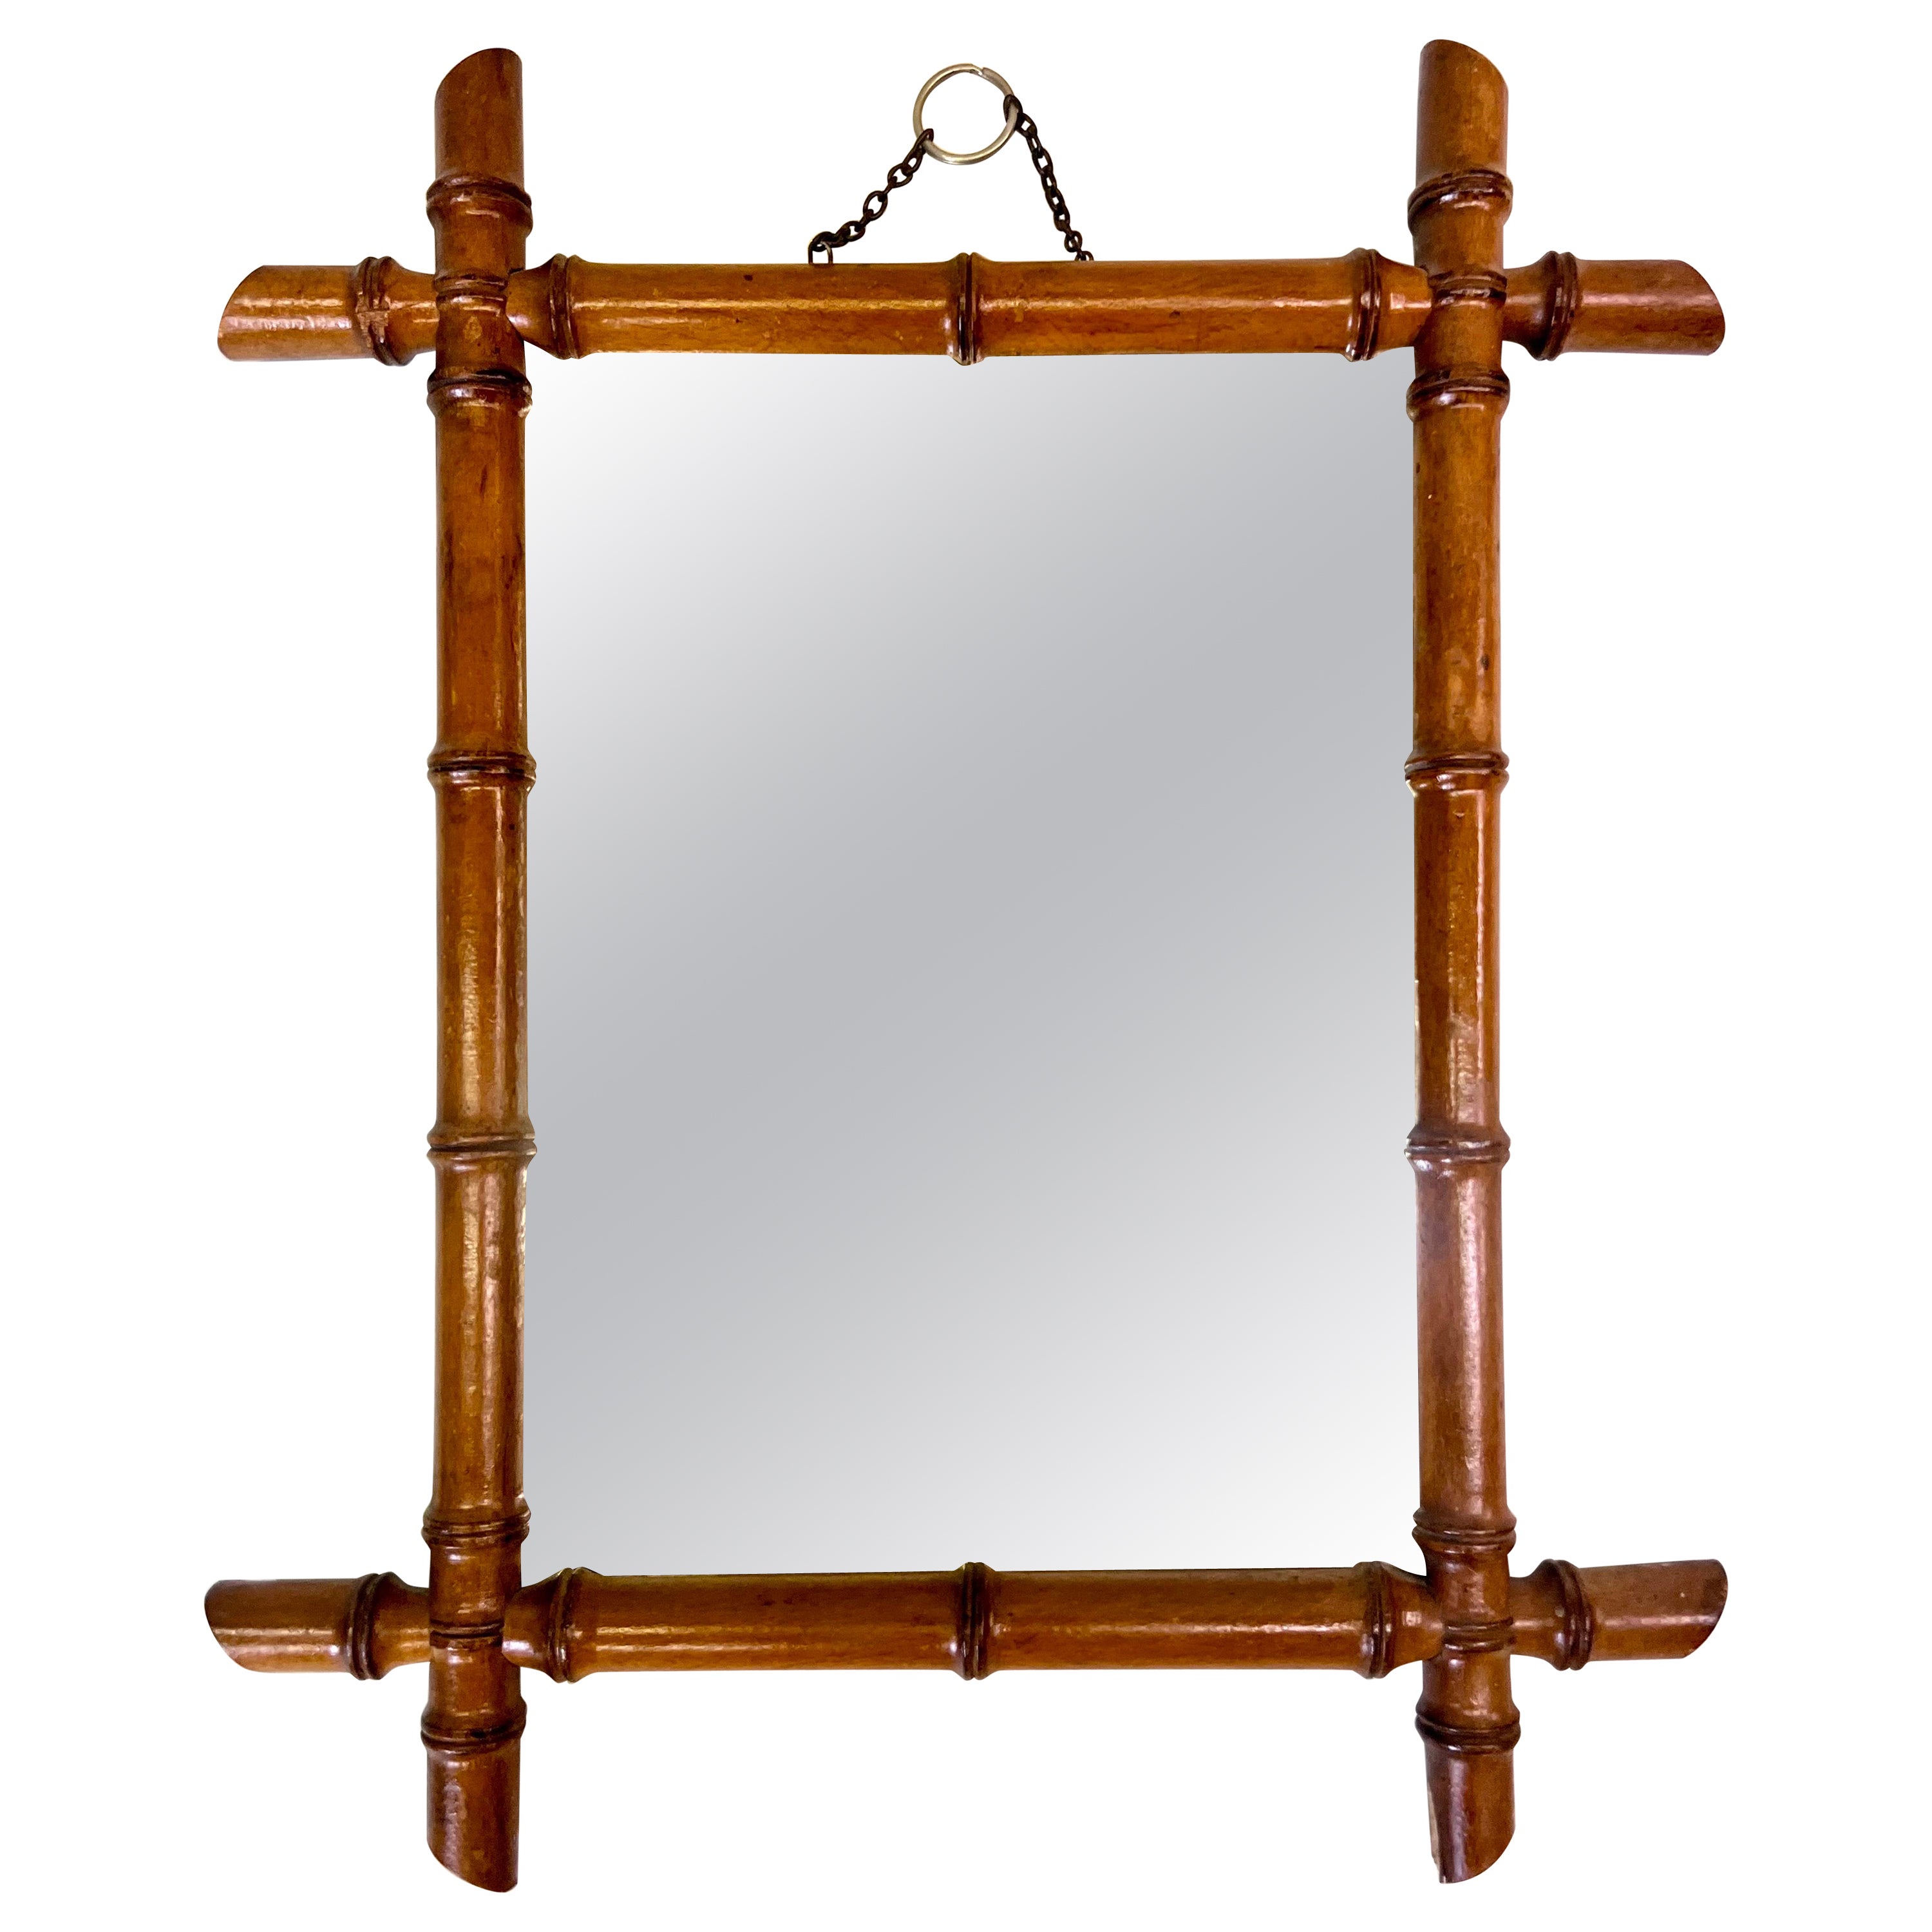 French Mid-century Modern Neoclassical Faux Bamboo Wall Mirror, style JM Frank